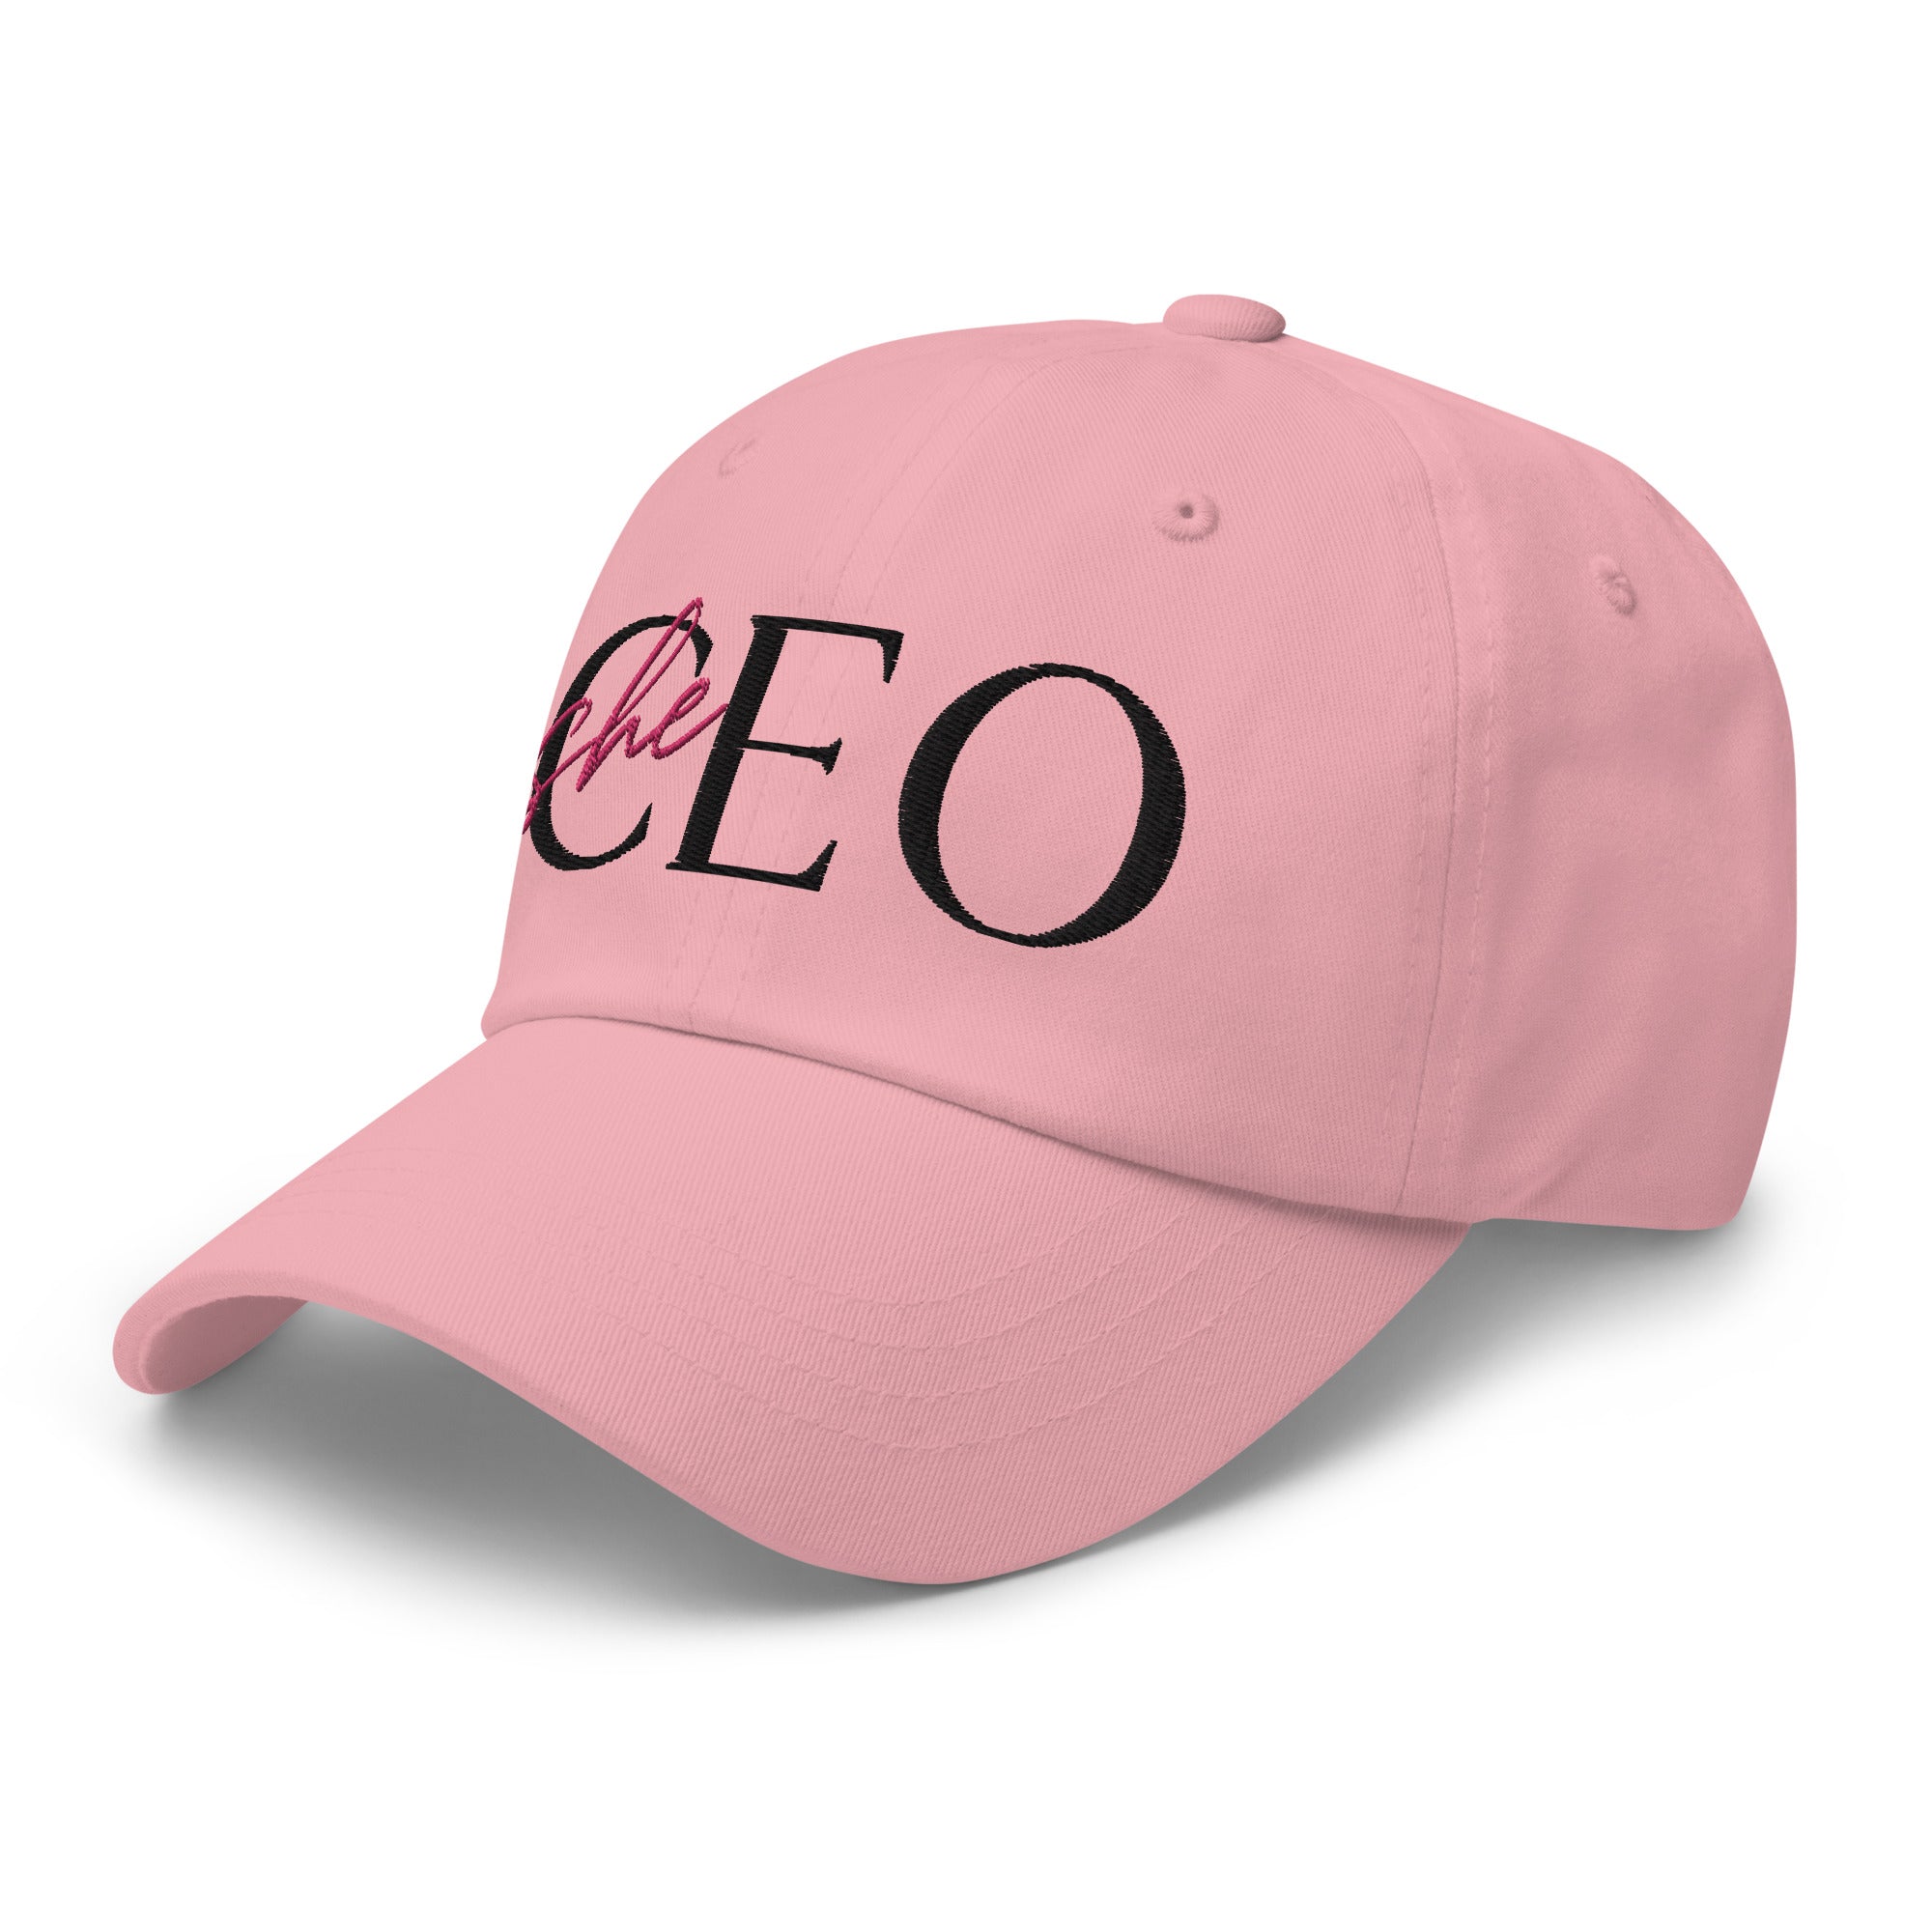 "SHE" CEO DAD HAT